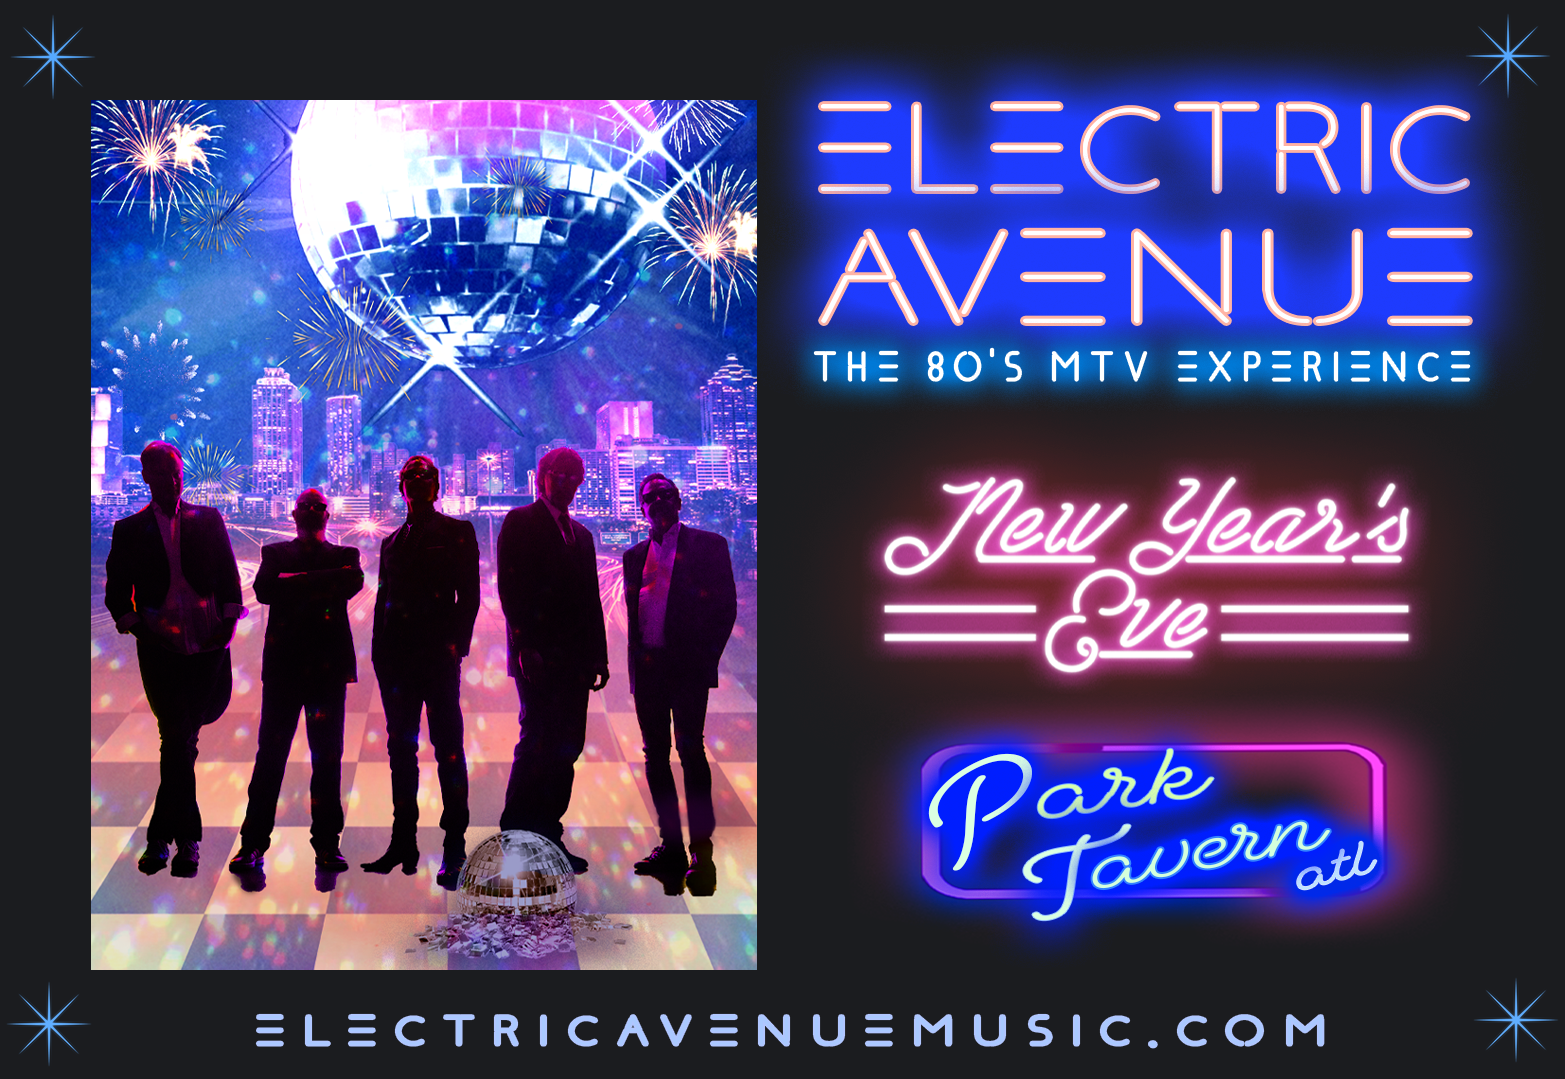 New Years Eve Celebration with Electric Avenue The 80\'s MTV Experience